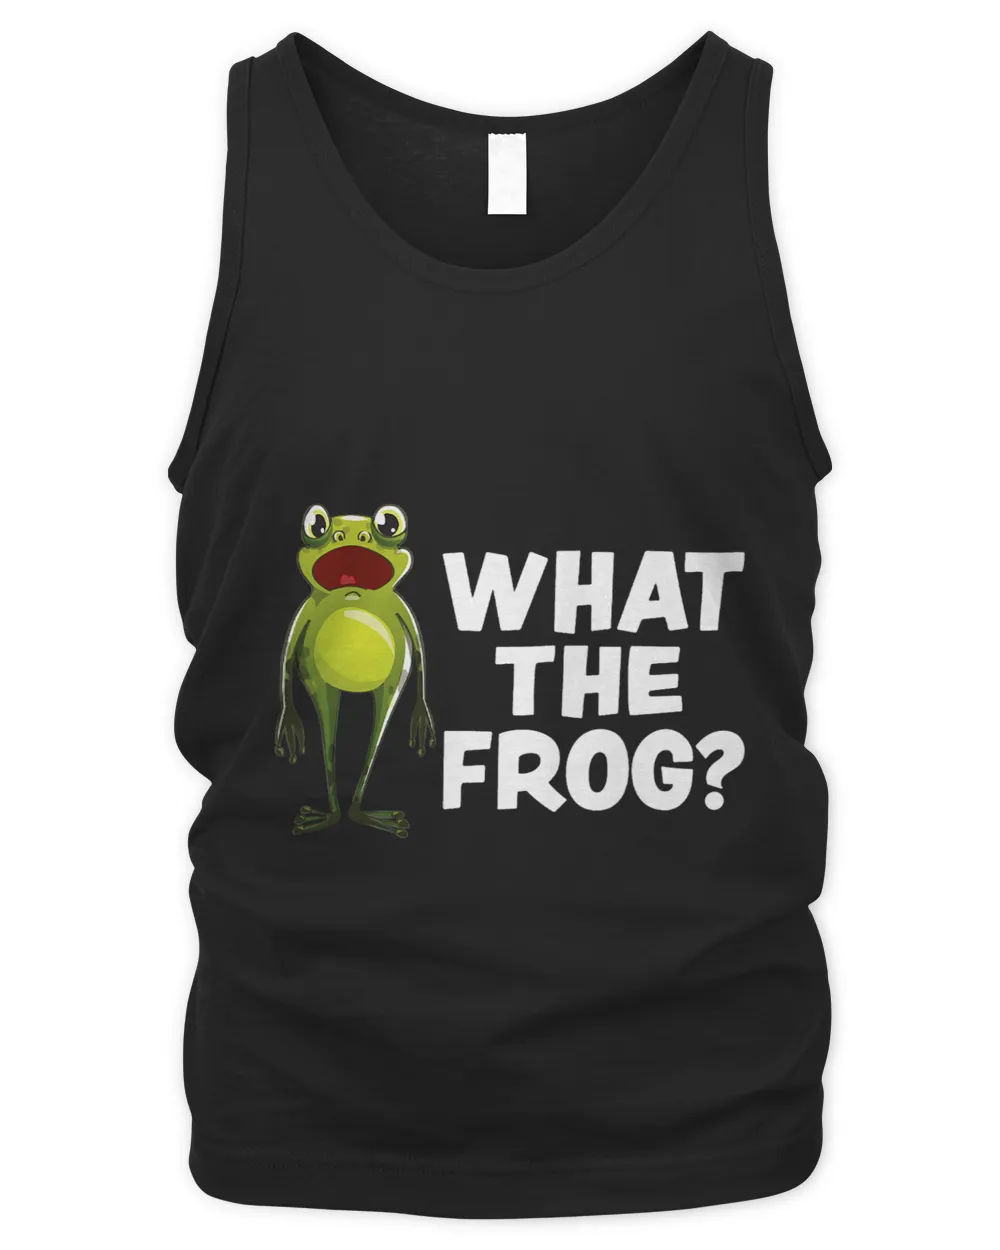 Frog Gift What the Frog Funny Saying FrogAmphibian Green Frog Lovers